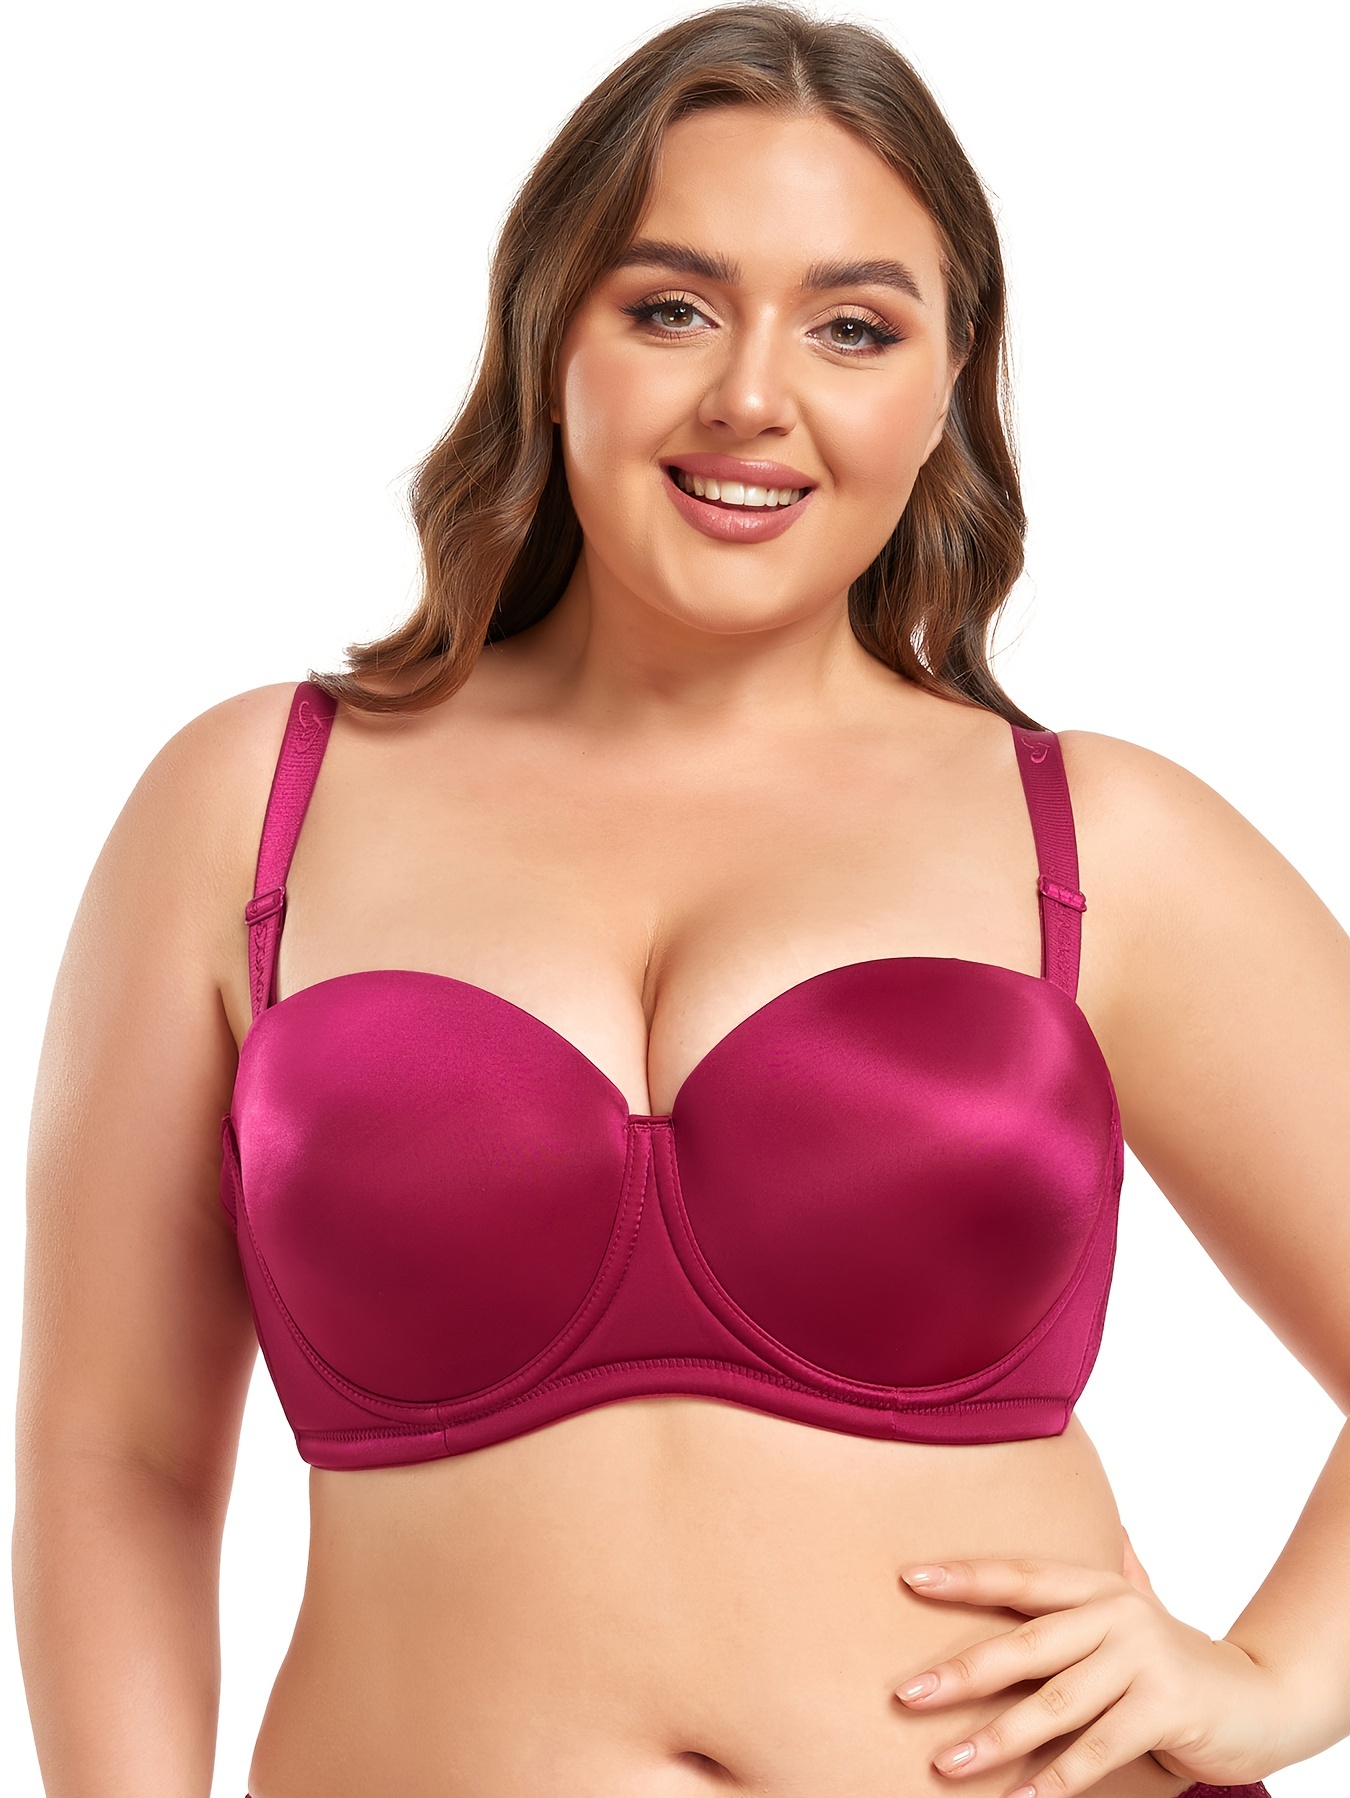 SBYOJLPB Bras for Women Plus Size Woman's Embroidered Glossy